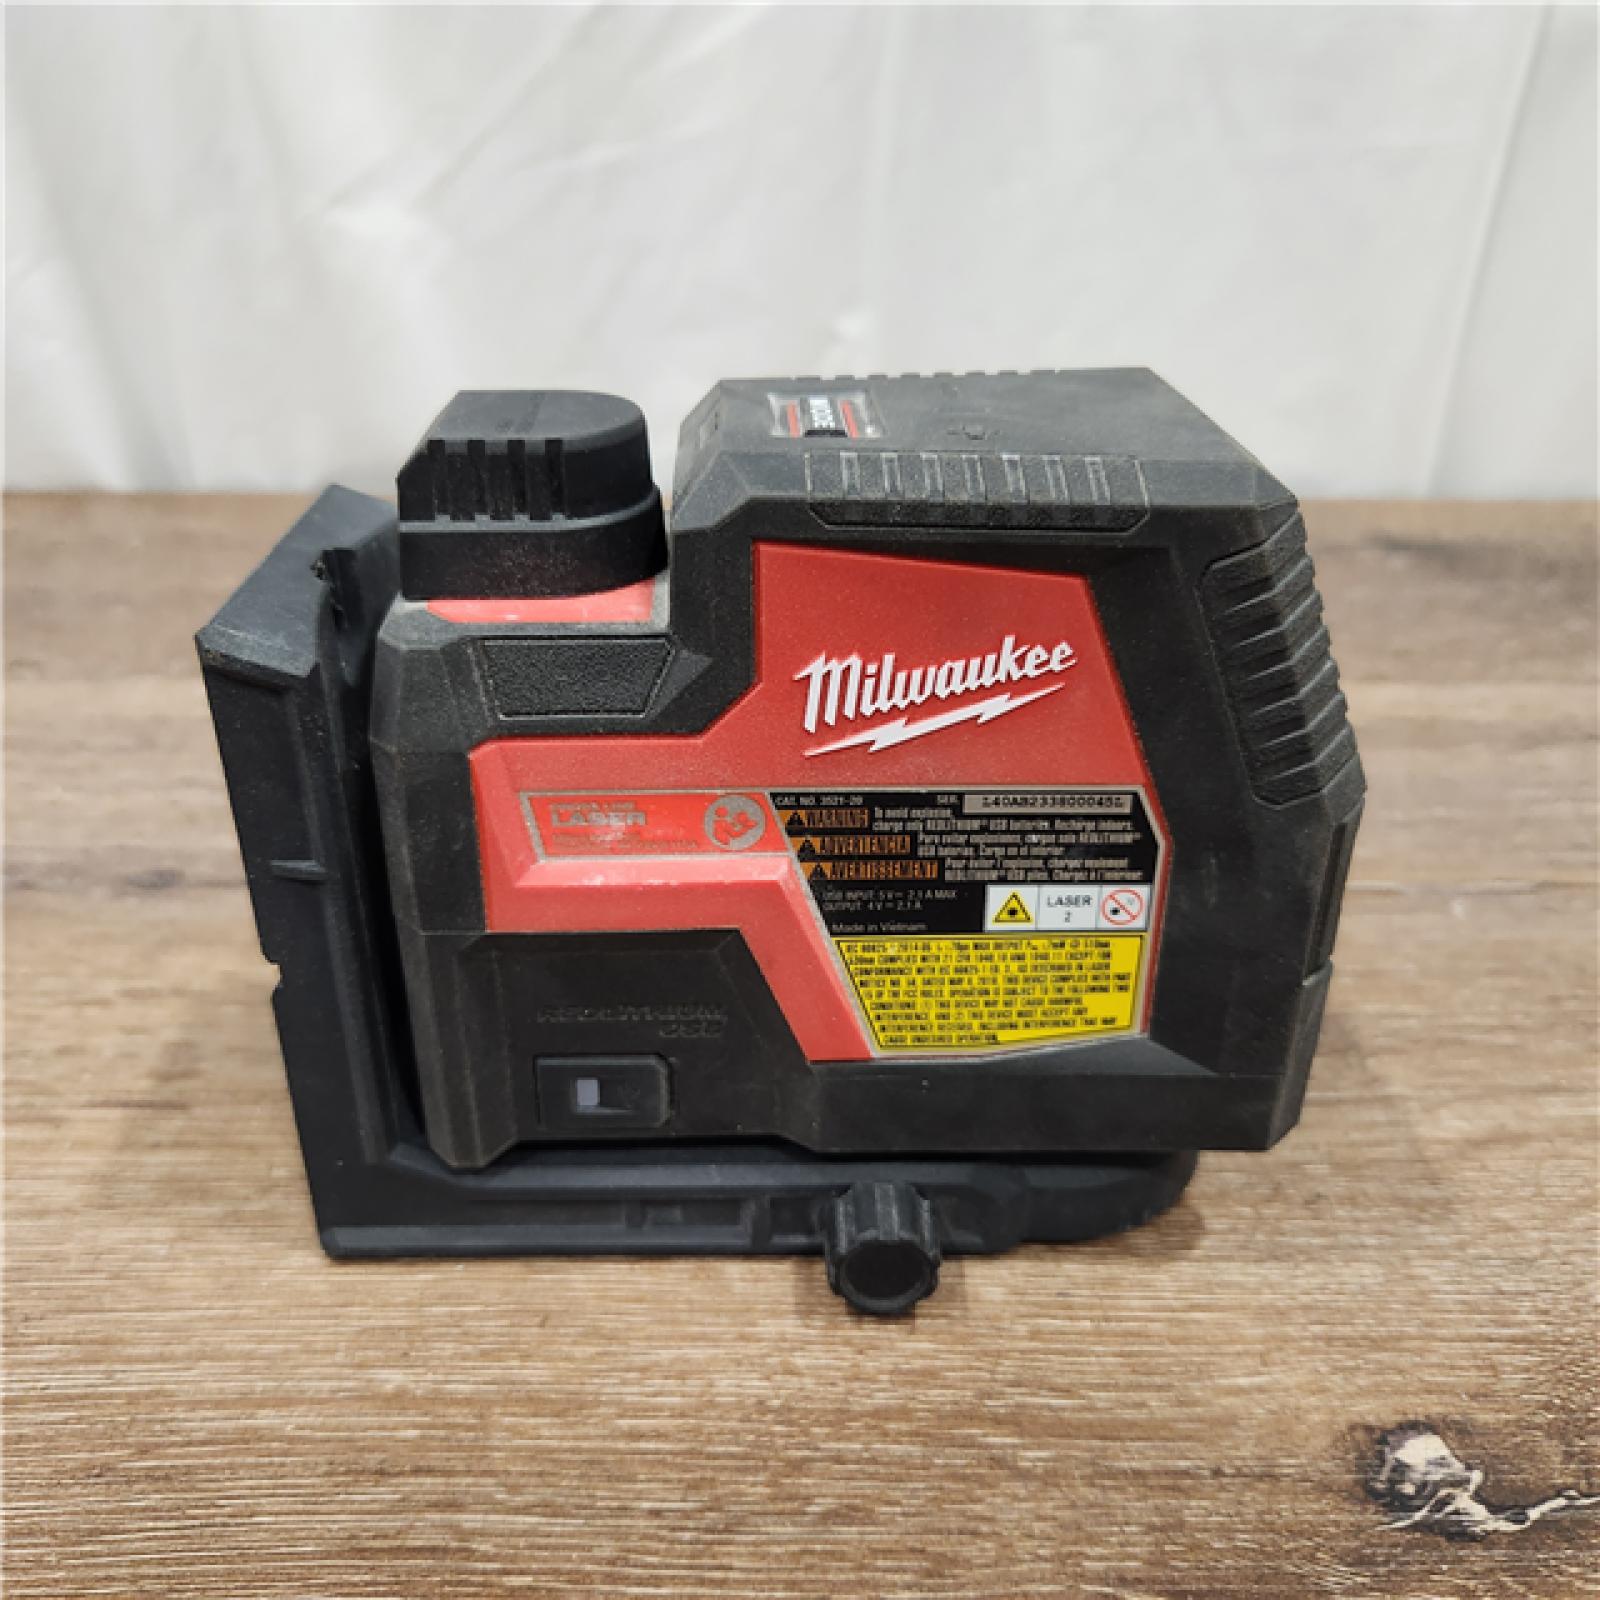 AS-IS Milwaukee 3521-21 4V Lithium-Ion Cordless USB Rechargeable Green Beam Cross Line Laser